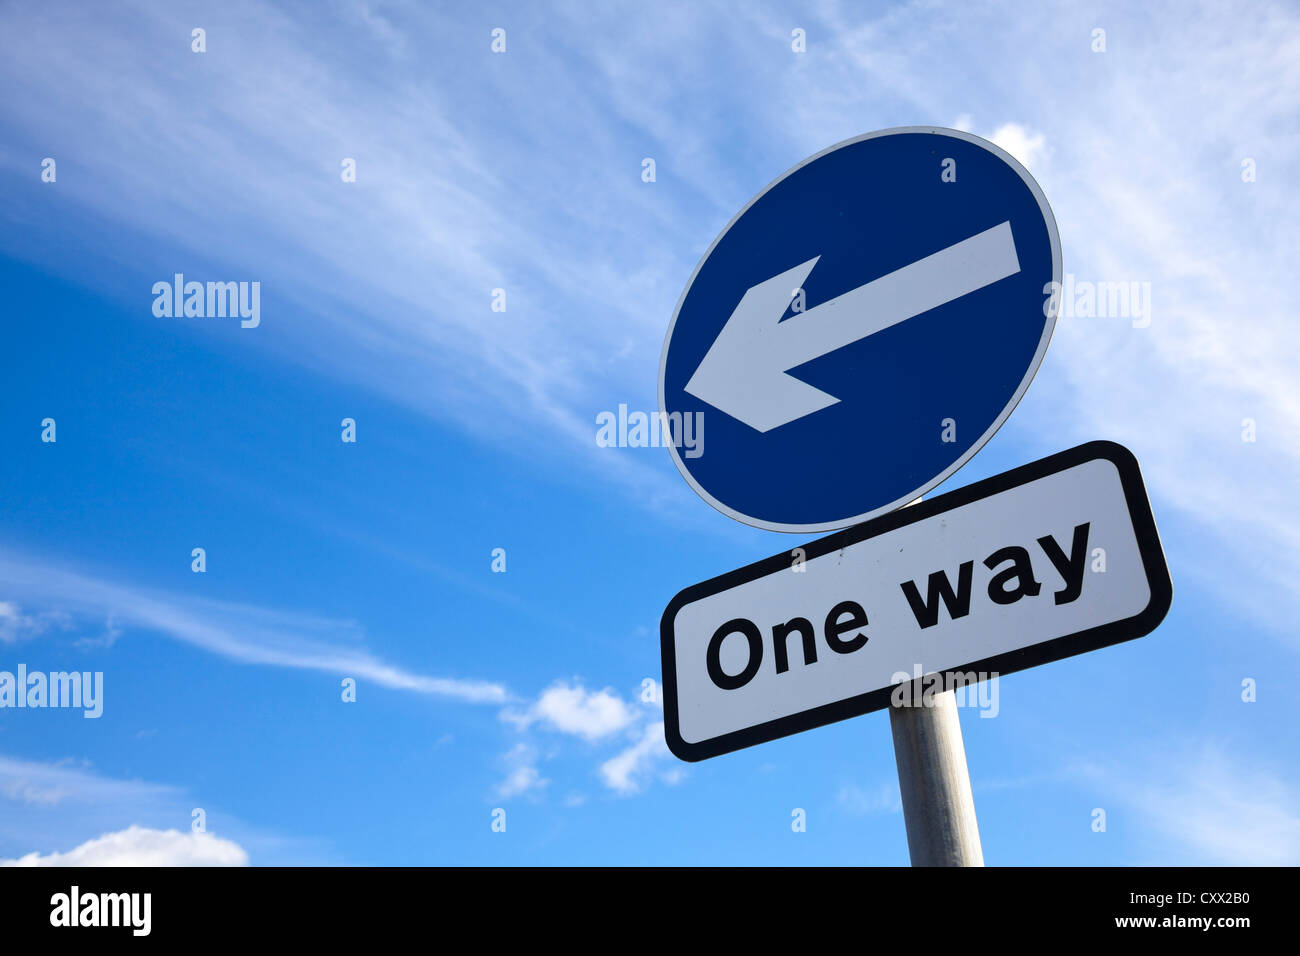 Road sign - One way traffic against blue sky, roads sign UK Stock Photo